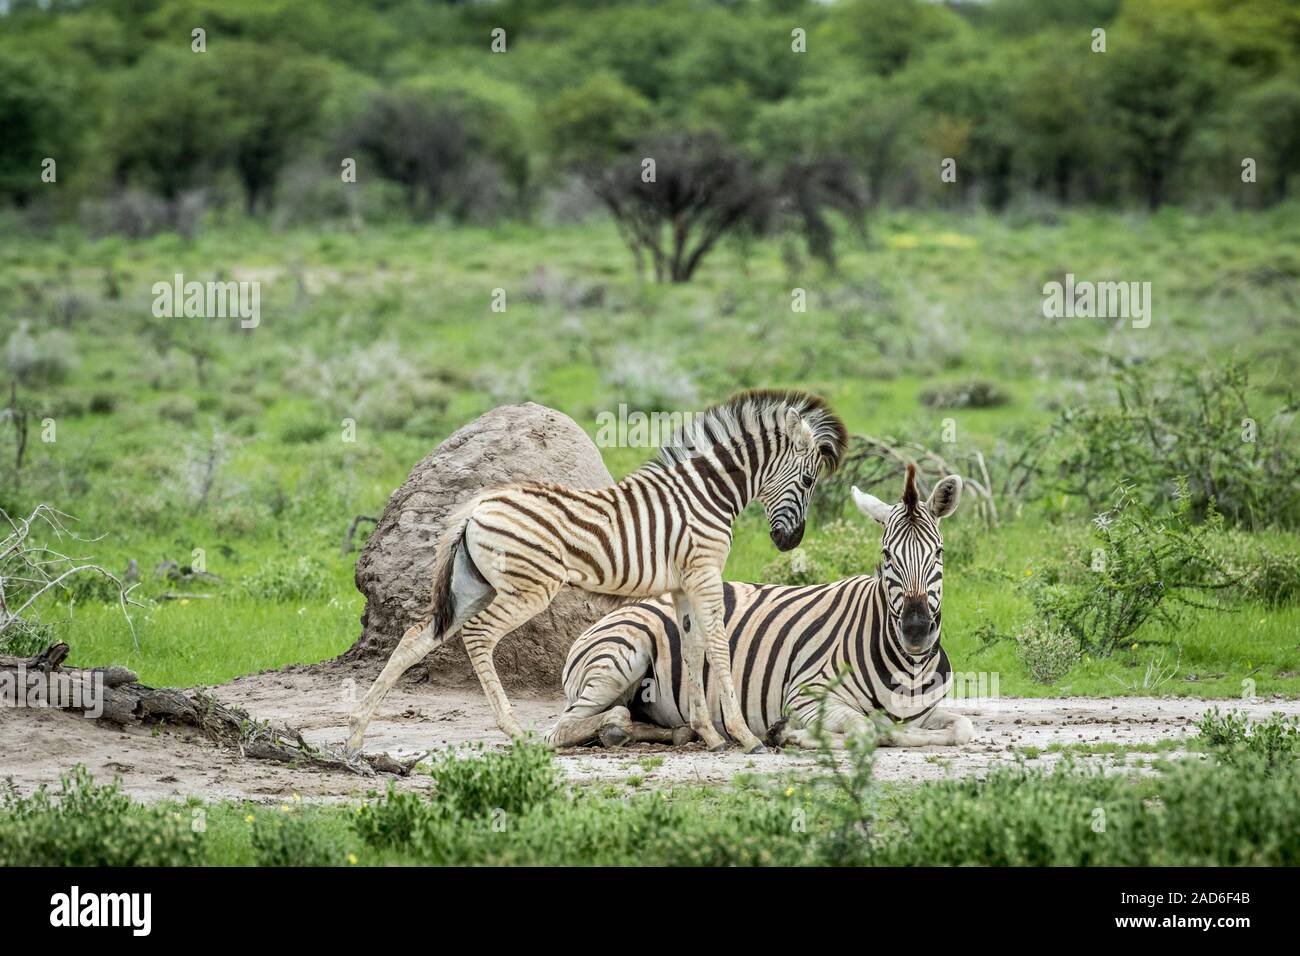 Mother and baby Zebra in the grass. Stock Photo